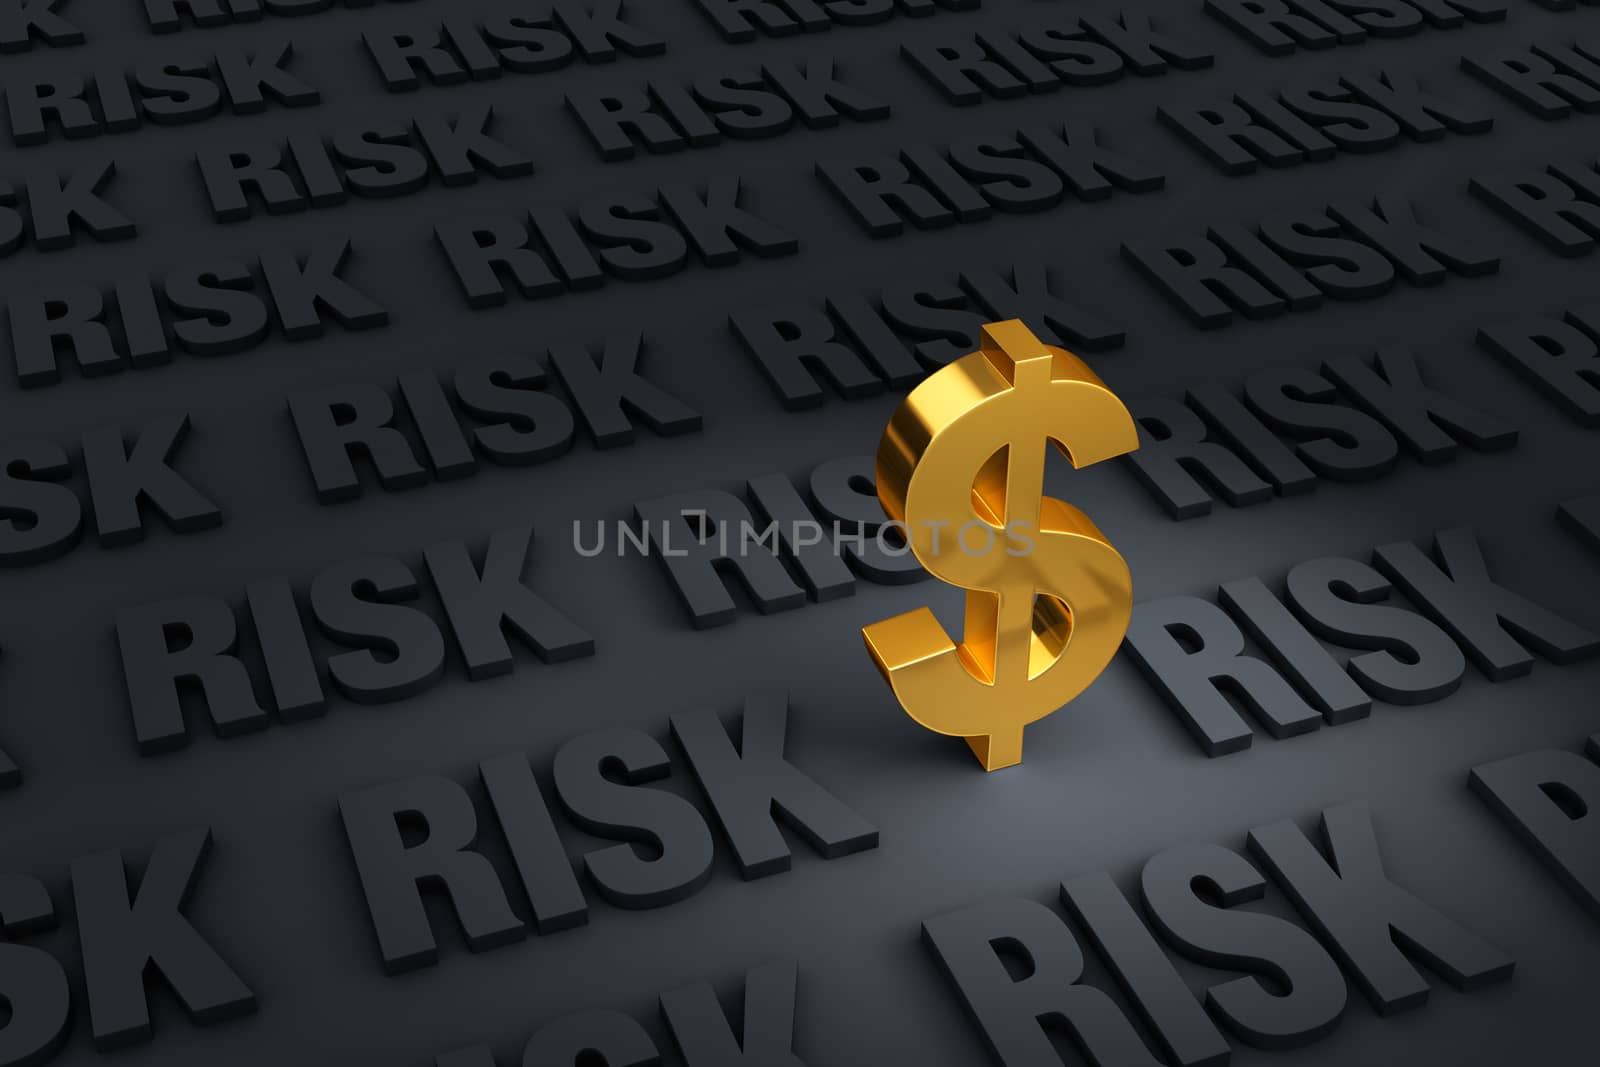 A gold dollar sign in the foreground stands in a dark plane of gray "RISK" receding into the distance